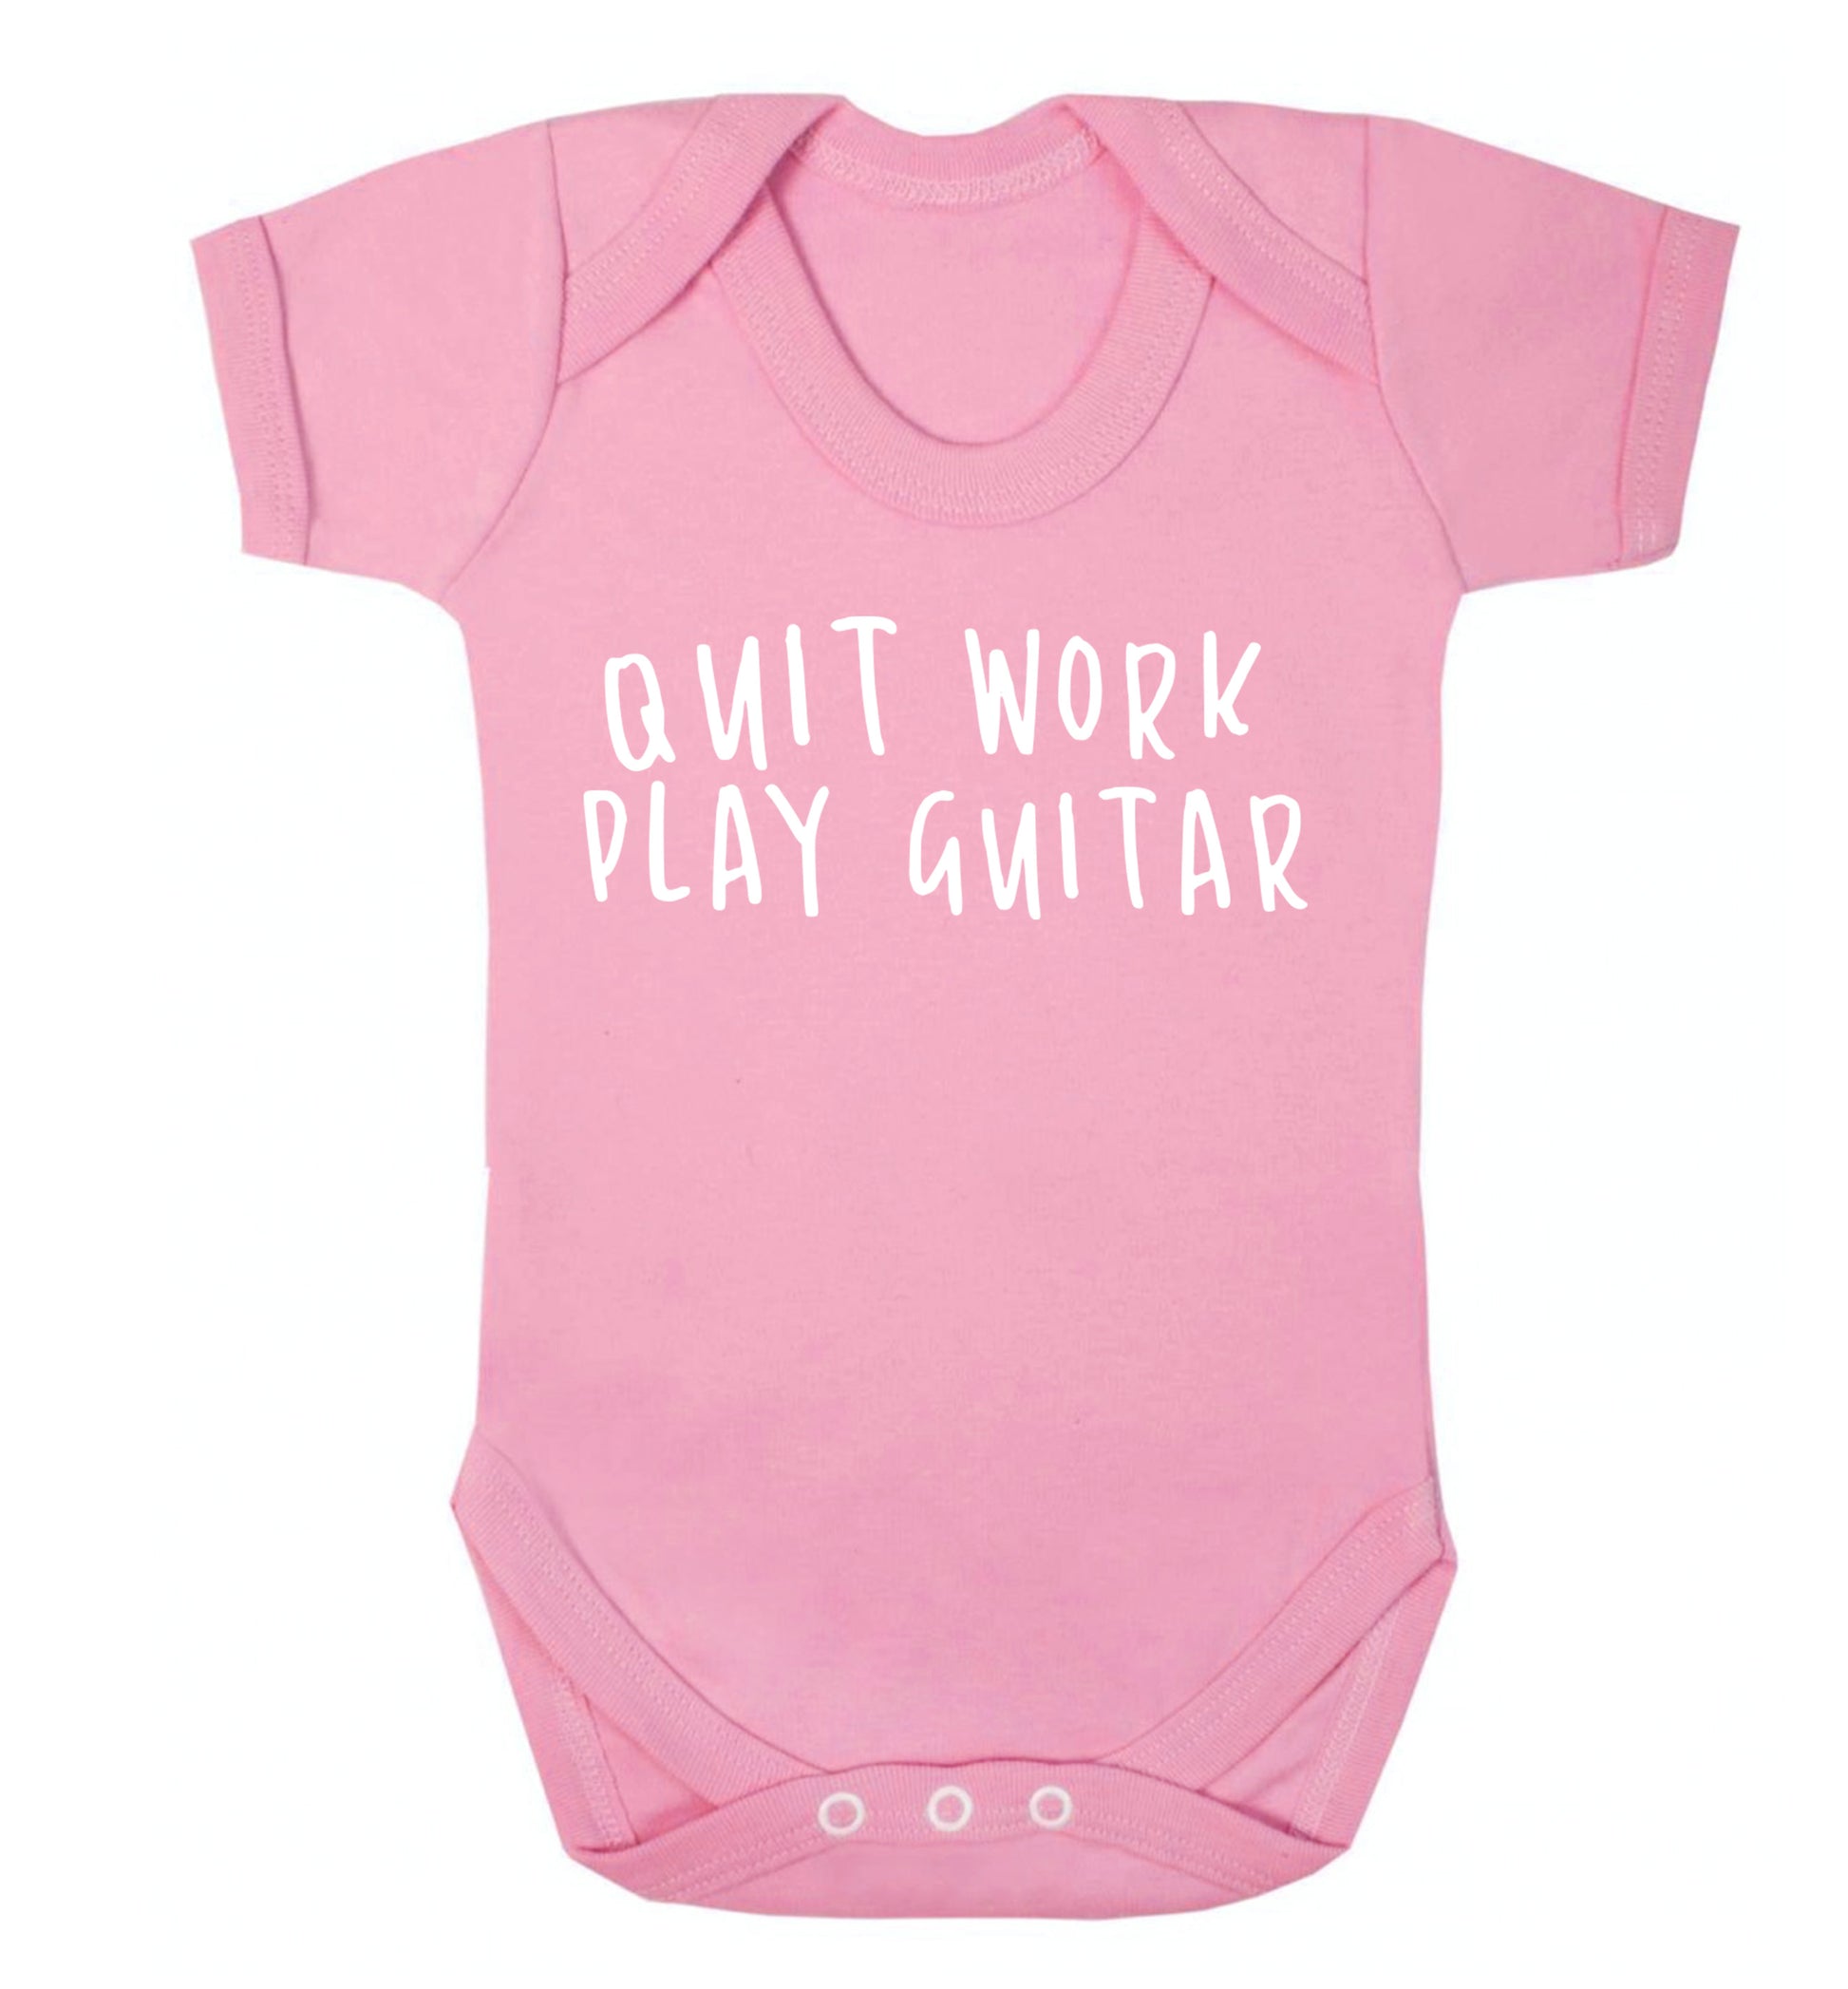 Quit work play guitar Baby Vest pale pink 18-24 months